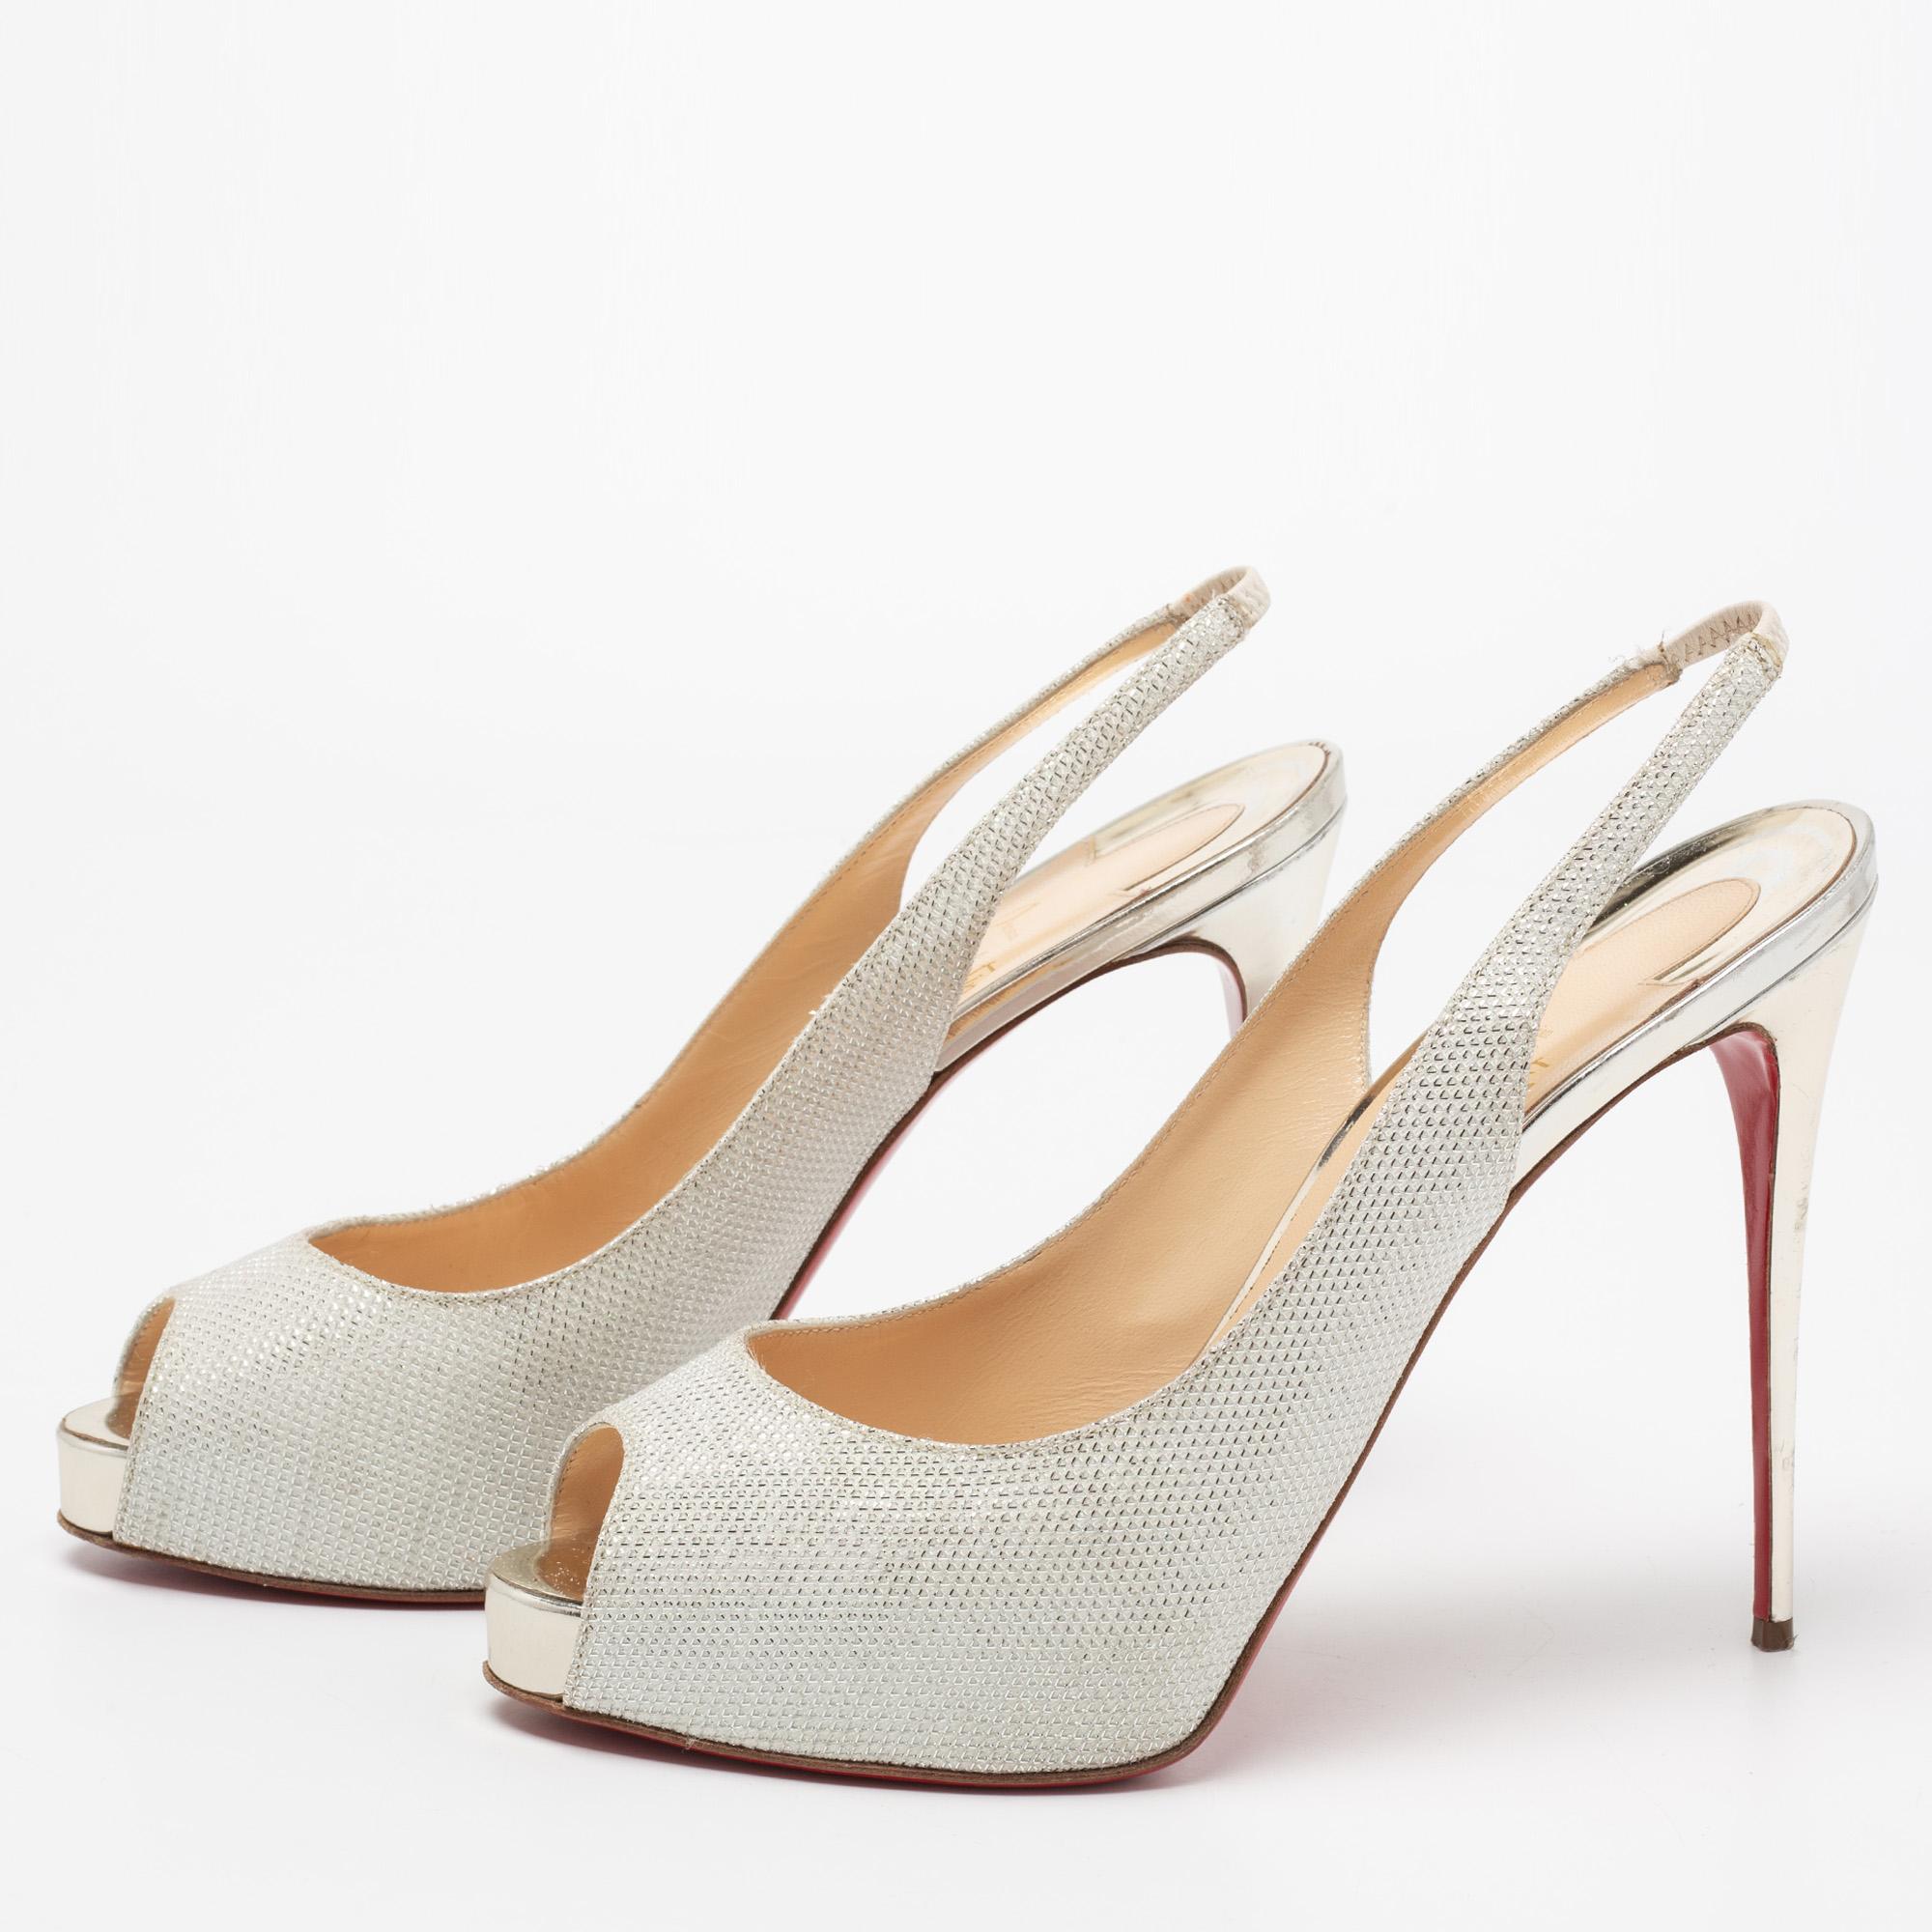 Stand out in the crowd with these Christian Louboutin Very Prive sandals! The slingback sandals are finished with a glittering exterior and have slender 13.5 cm heels. They feature peep toes and leather-lined insoles showing the brand name.

